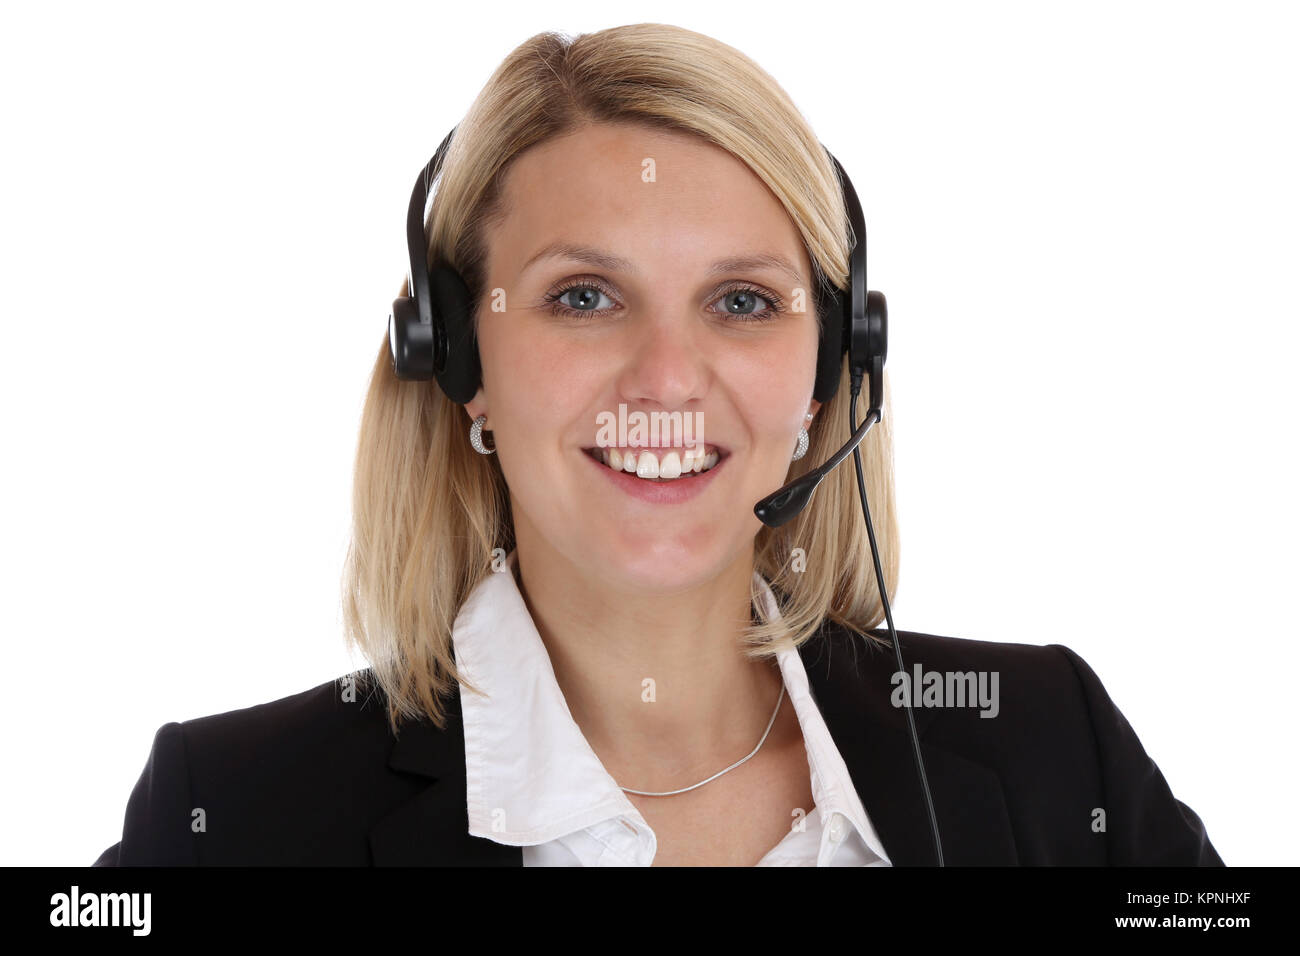 call center woman portrait secretary with headset phone business cut Stock Photo